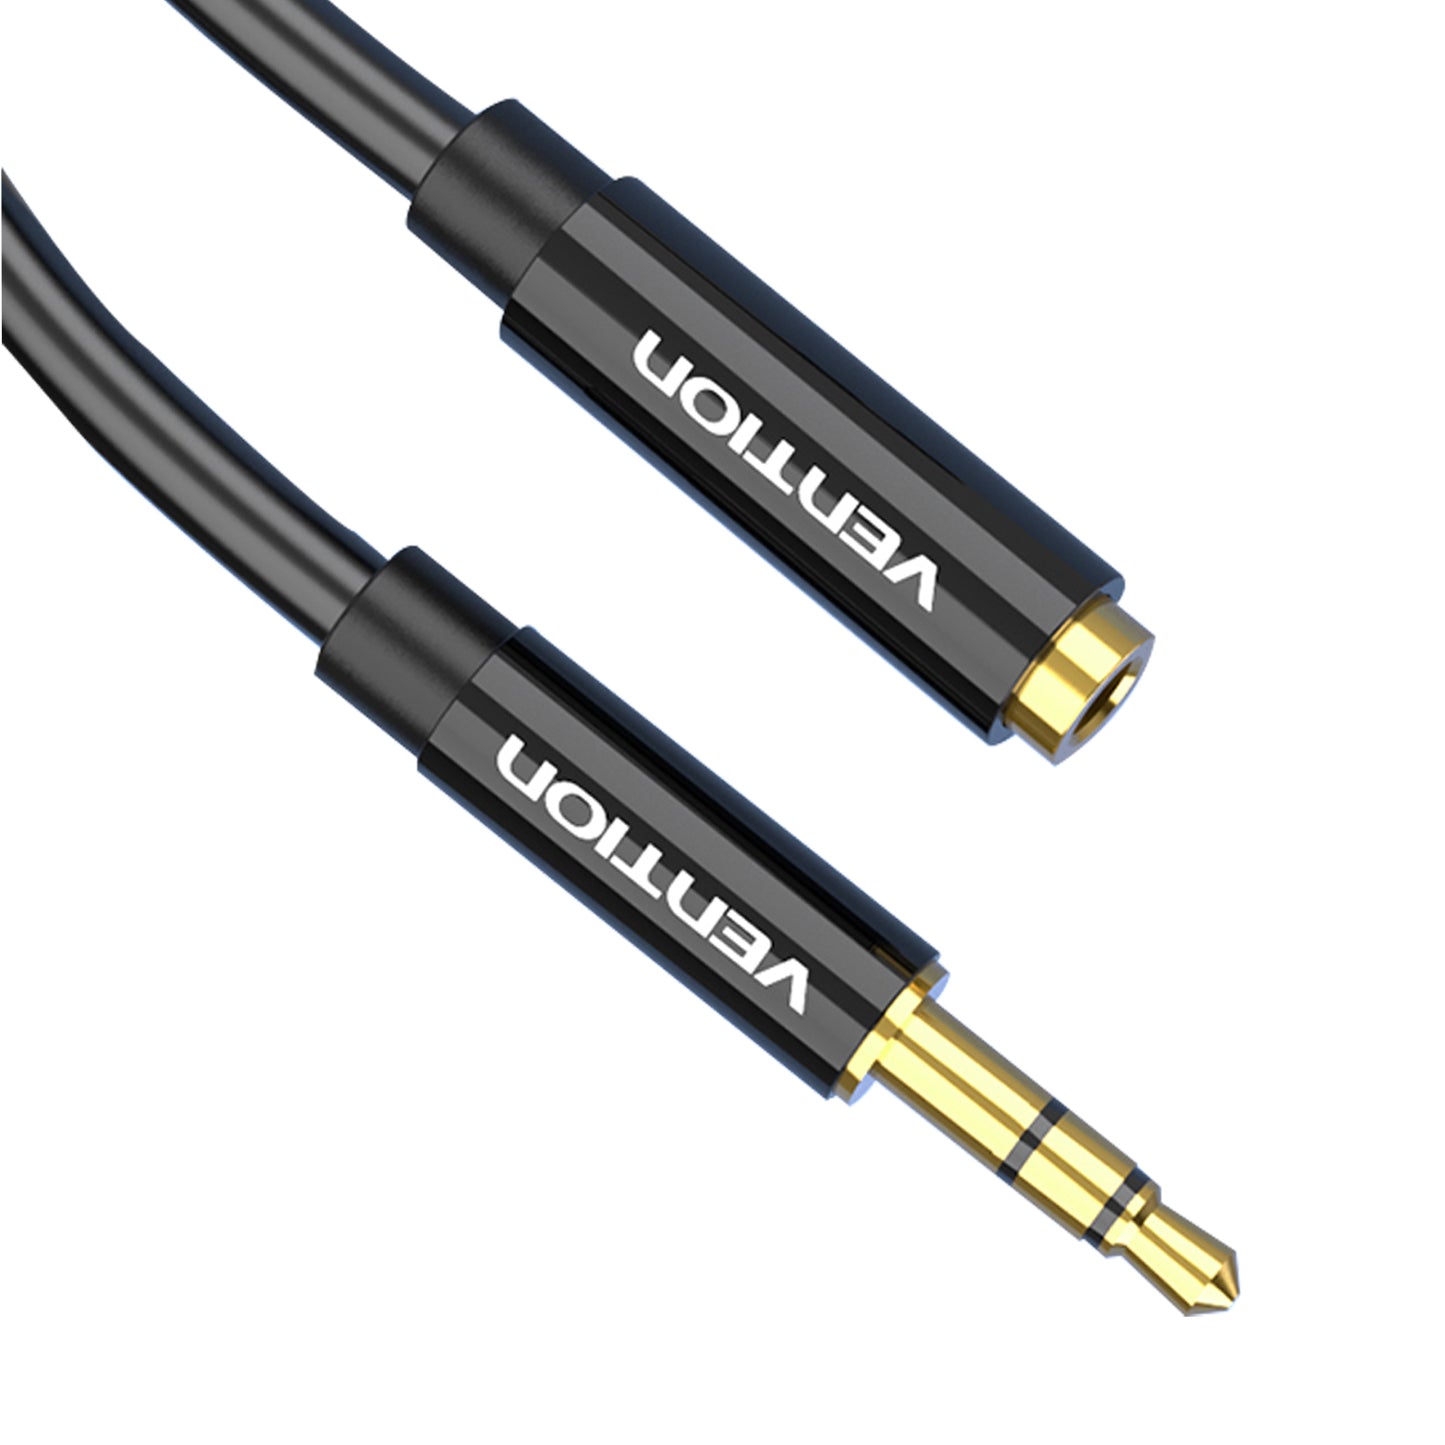 Vention TRS 3.5mm Female to TRS 3.5mm Male Gold Plated (BBZ) Audio Cable for PC, Laptops, Mobile Phones, Earphones, Speakers (Available in 0.5M, 1M, 1.5M, and 2M)